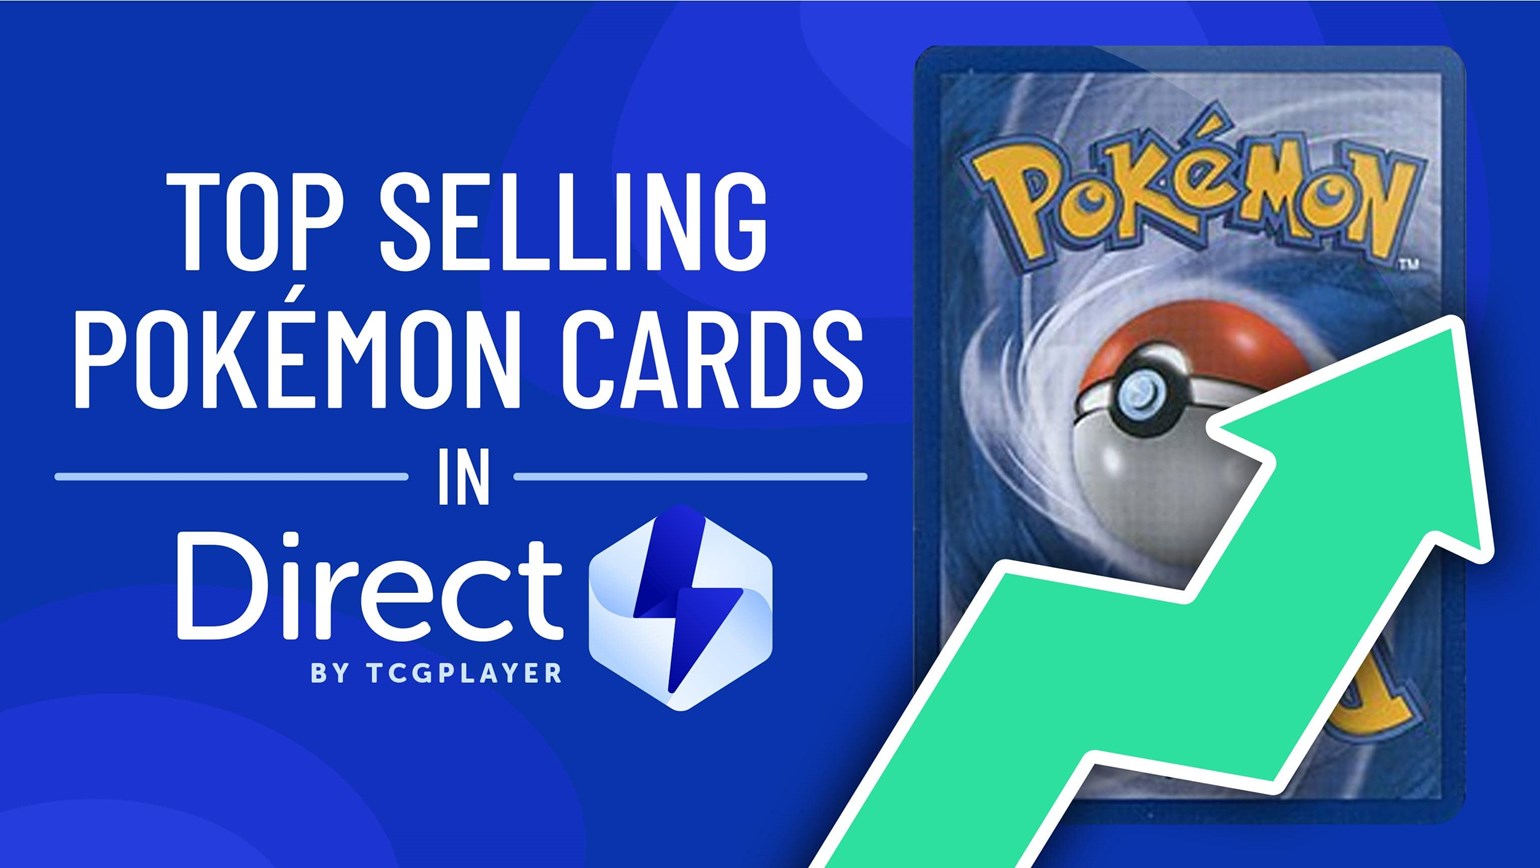 May Top Selling Pokémon Cards Under $25 in Direct by TCGplayer